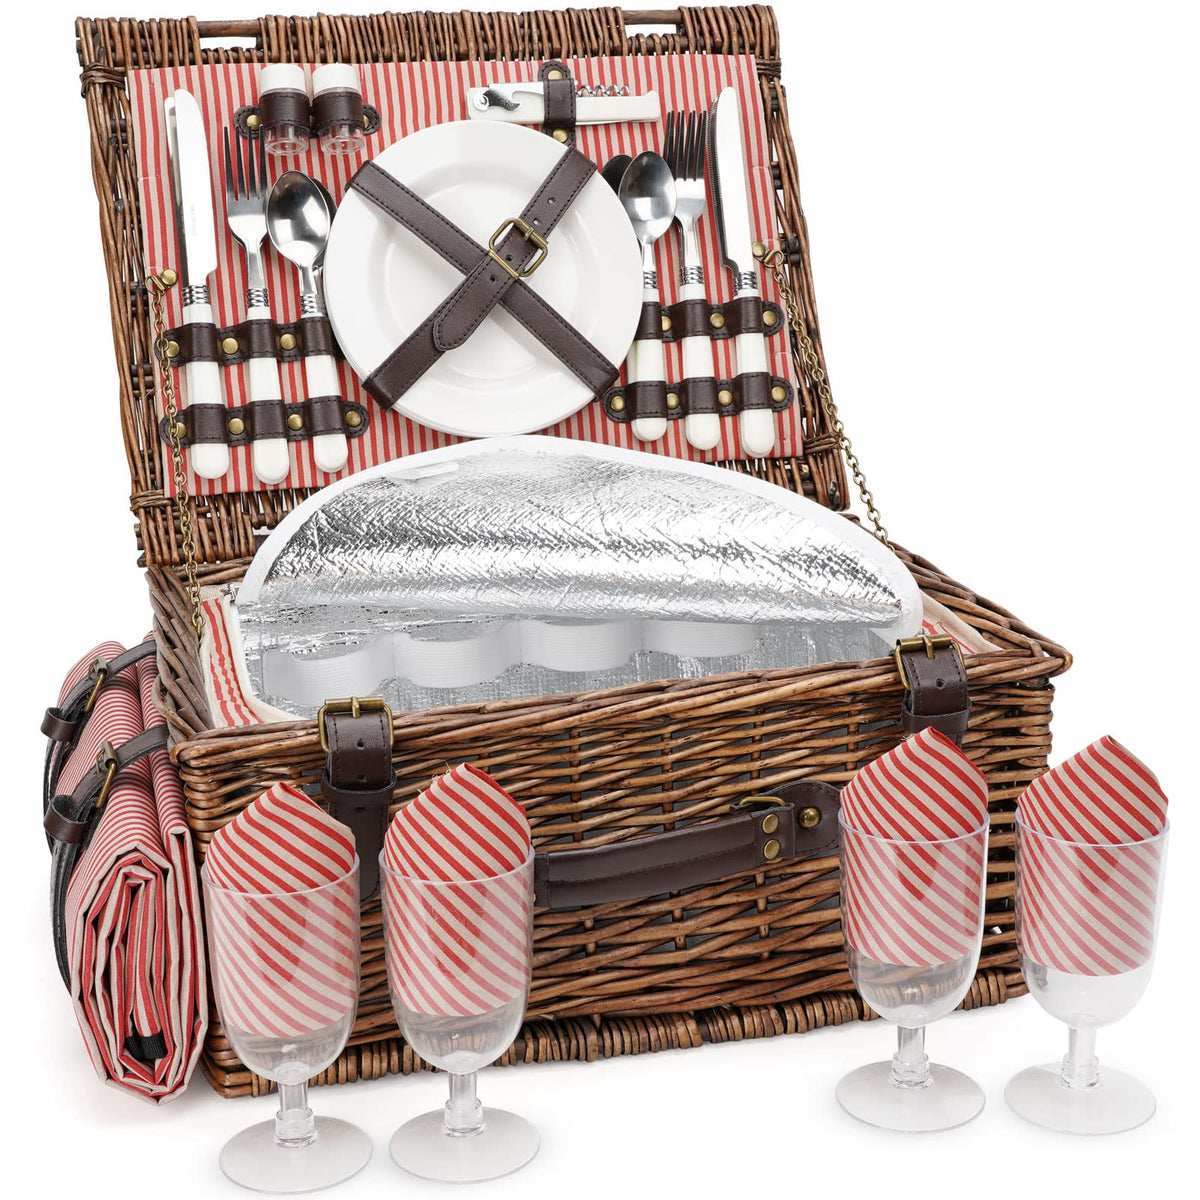 Picnic Basket Set for 4 Persons with Cooler